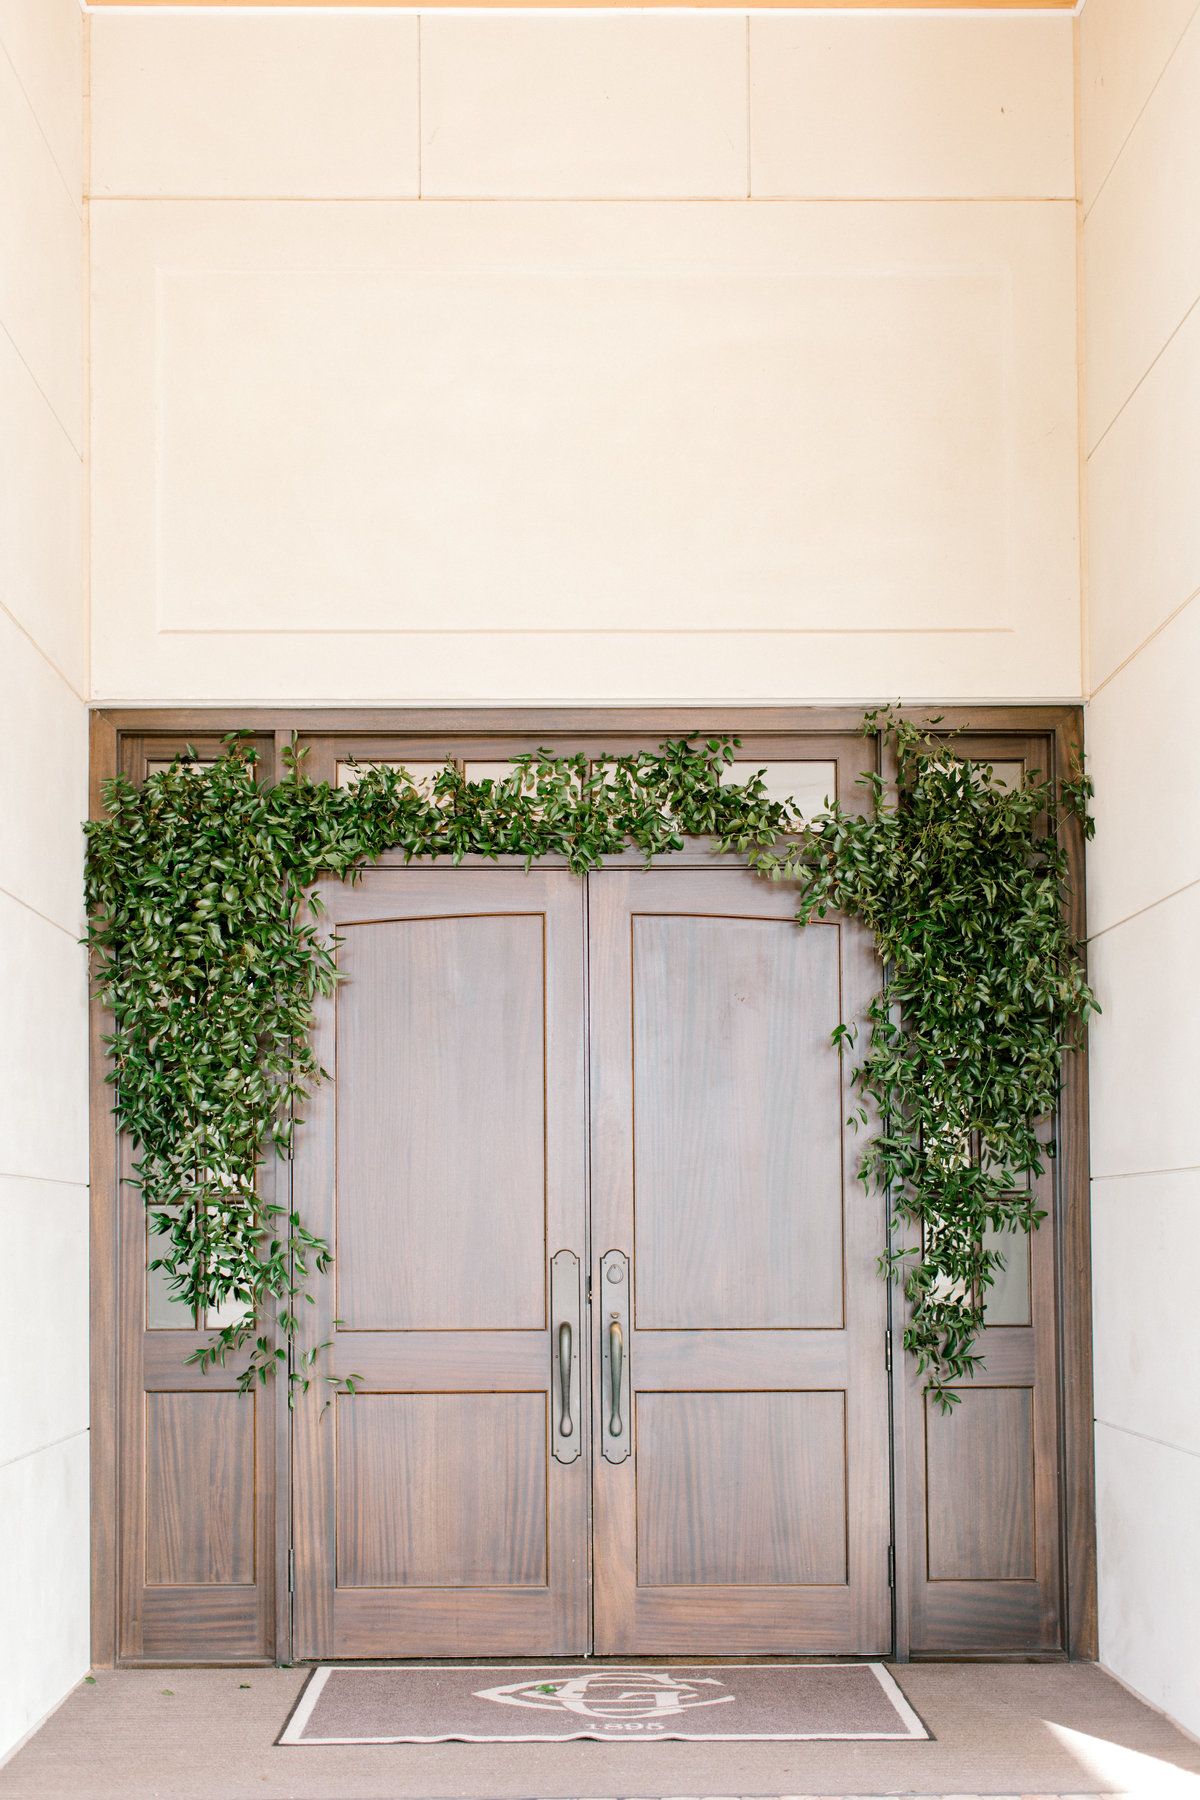 clink-events-greenville-wedding-planner-greenville-country-club-greenery-door